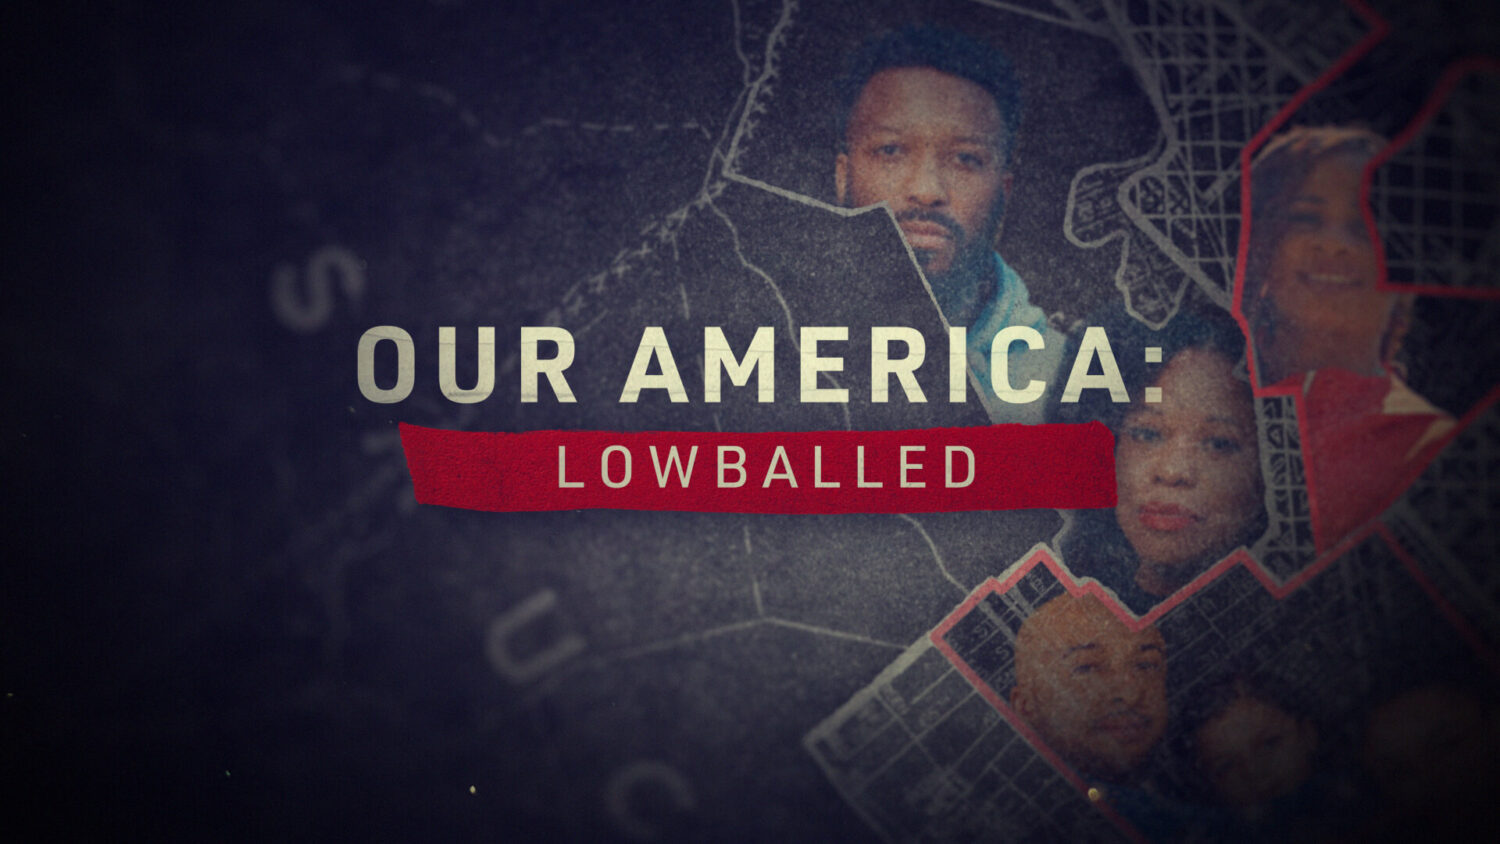 OWN IT: Building Black Wealth to host Black History Month viewing of ‘Our America: Lowballed’